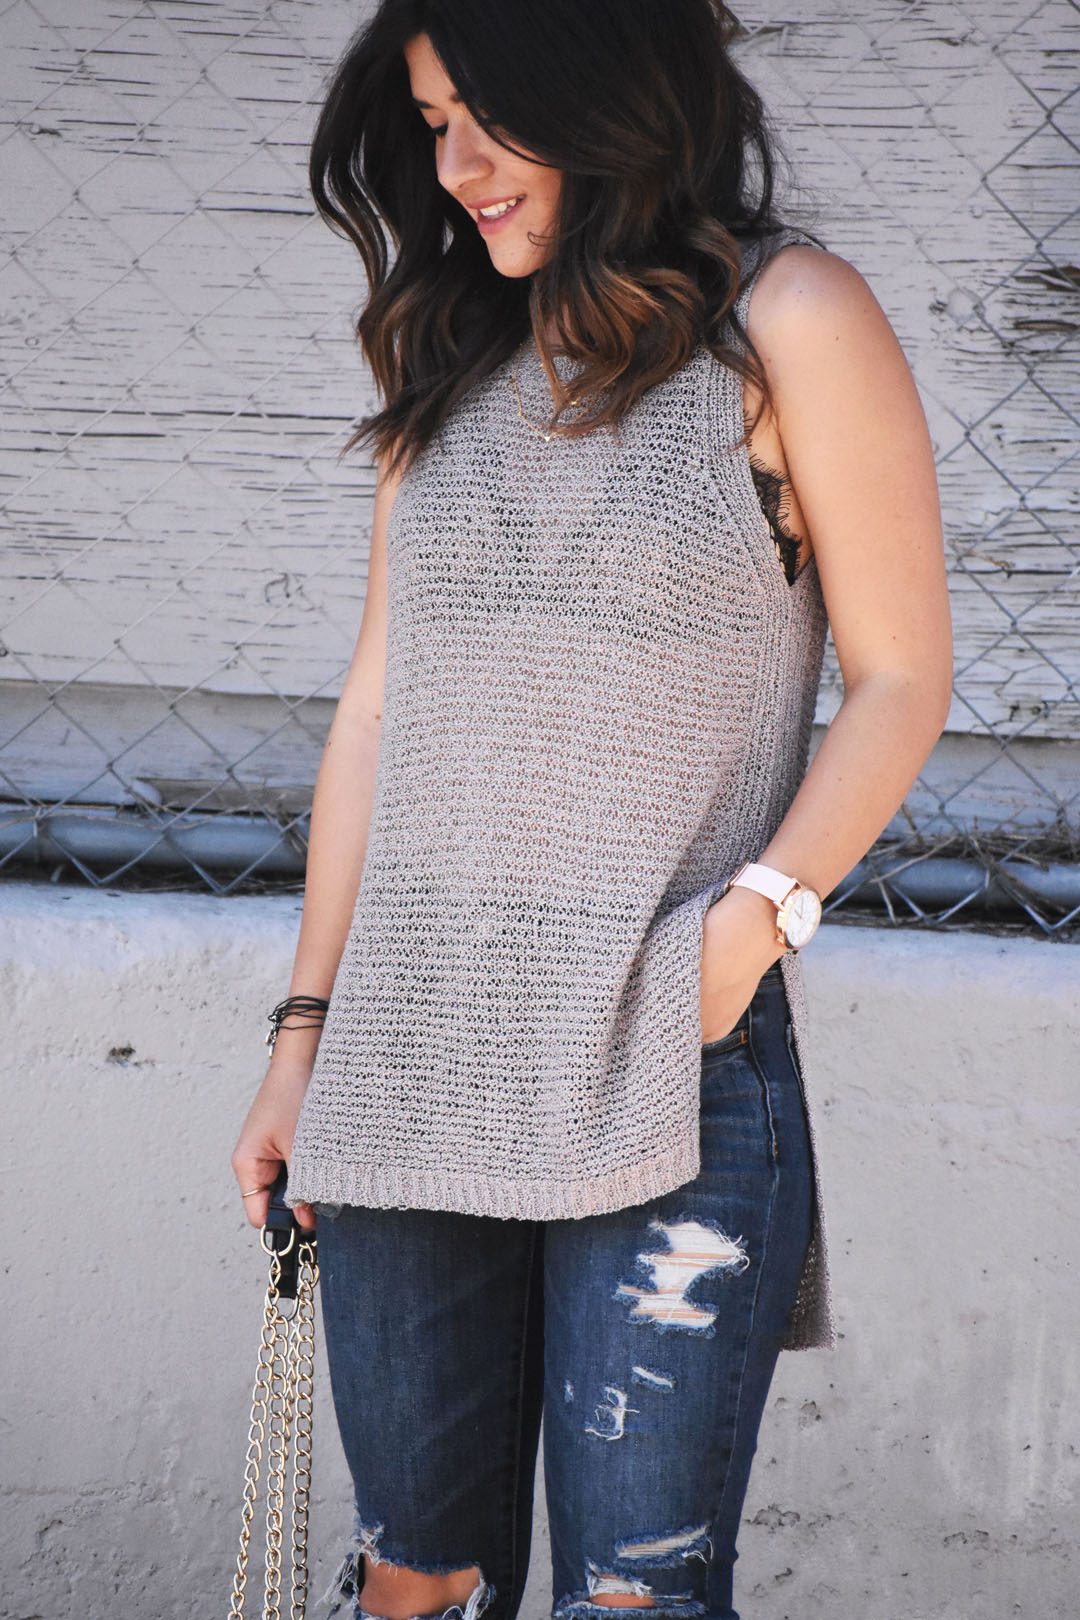 Carolina Hellal of Chic Talk wearing an ASTR the label knit top, a forever 21 black bralette, and American Eagle jeans.